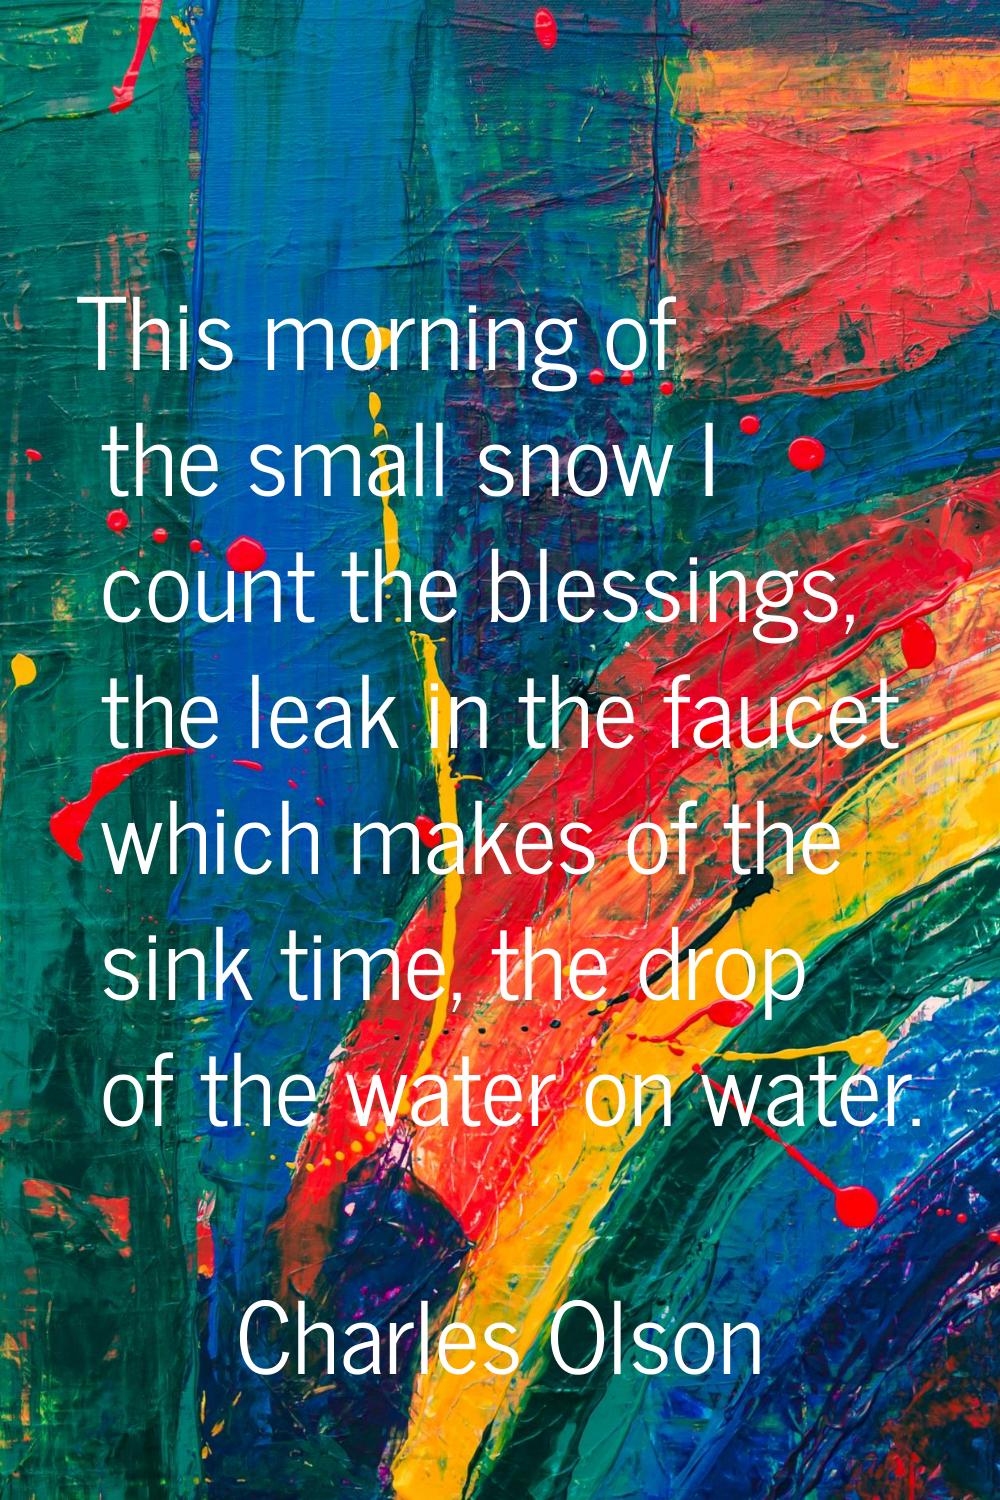 This morning of the small snow I count the blessings, the leak in the faucet which makes of the sin